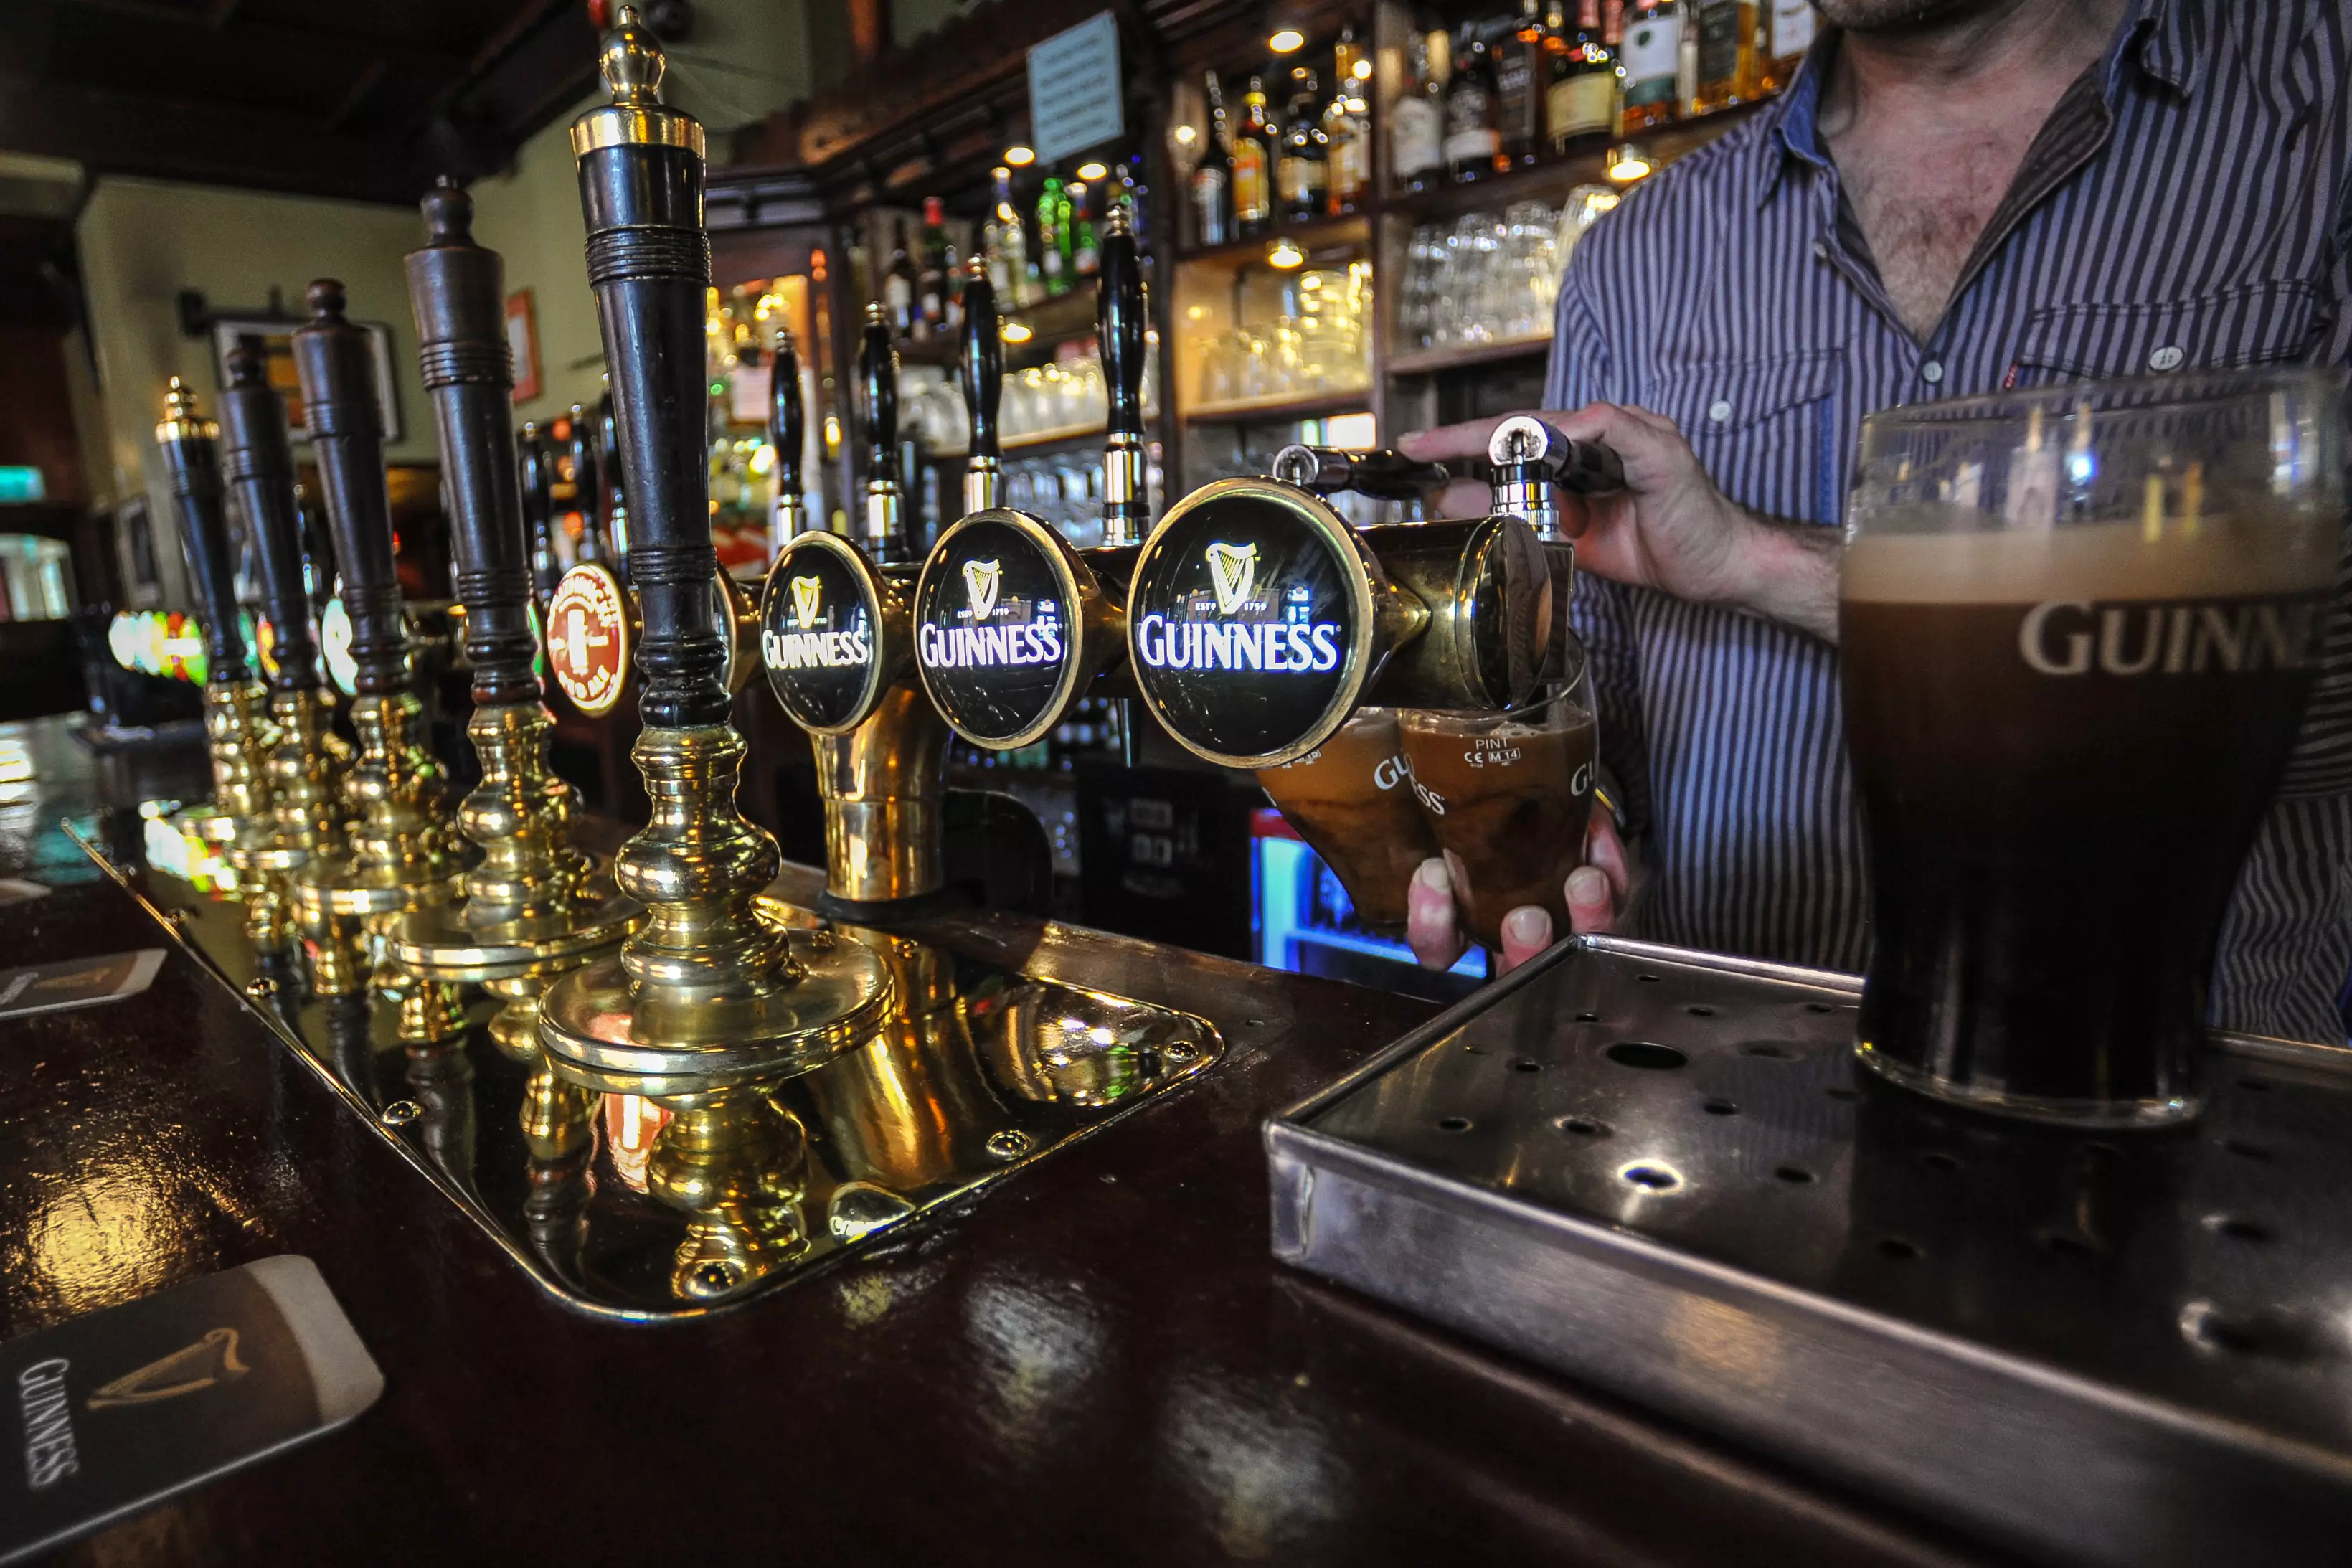 Pubs are also opening up and down the country (